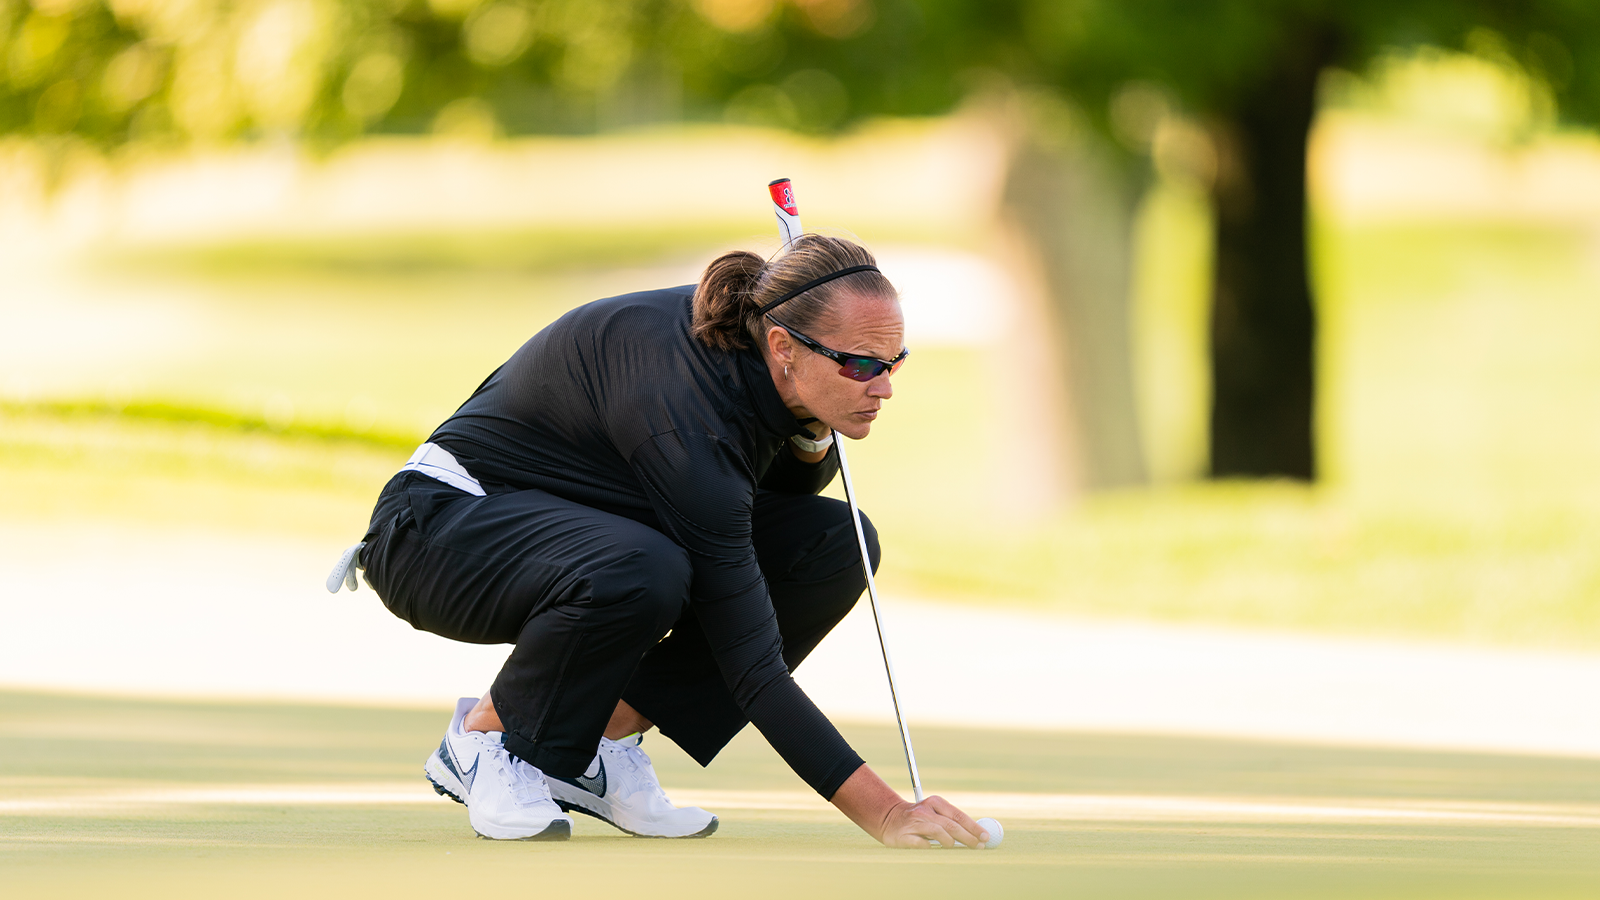 PGA Professional Jennifer Borocz reads her putt on the sixth hole during the first round of the 2020 KPMG Women's PGA Championship at Aronimink Golf Club.